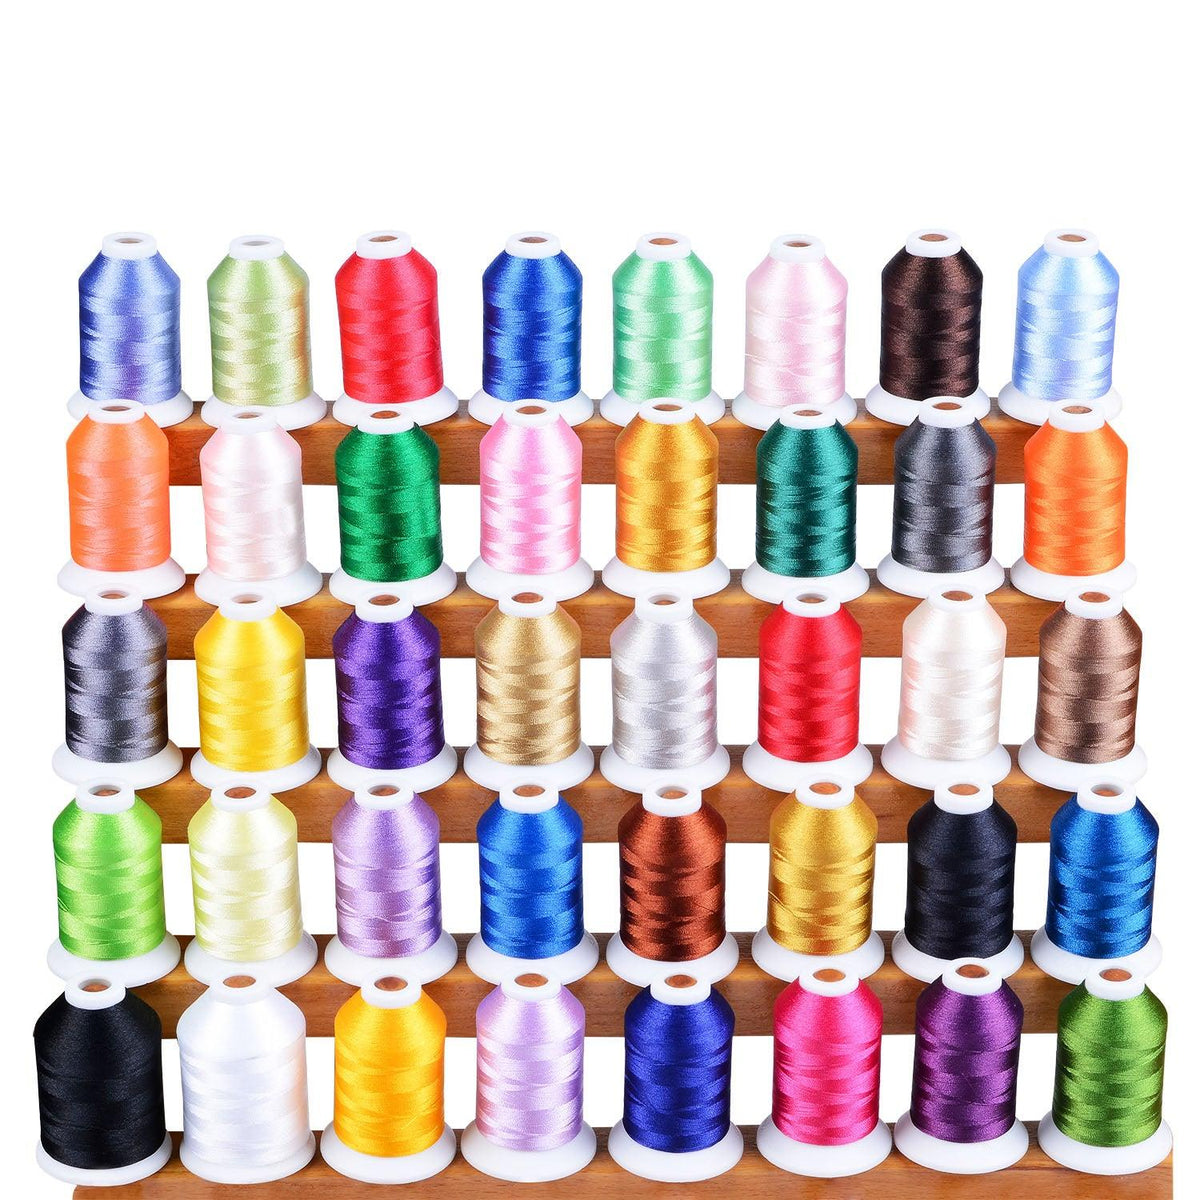 Simthreads 3 Neon Colors Machine Embroidery Threads 5500 Yds Each Polyester  Thread 40wt For Most Home Sewing Embroidery Machine - Thread - AliExpress